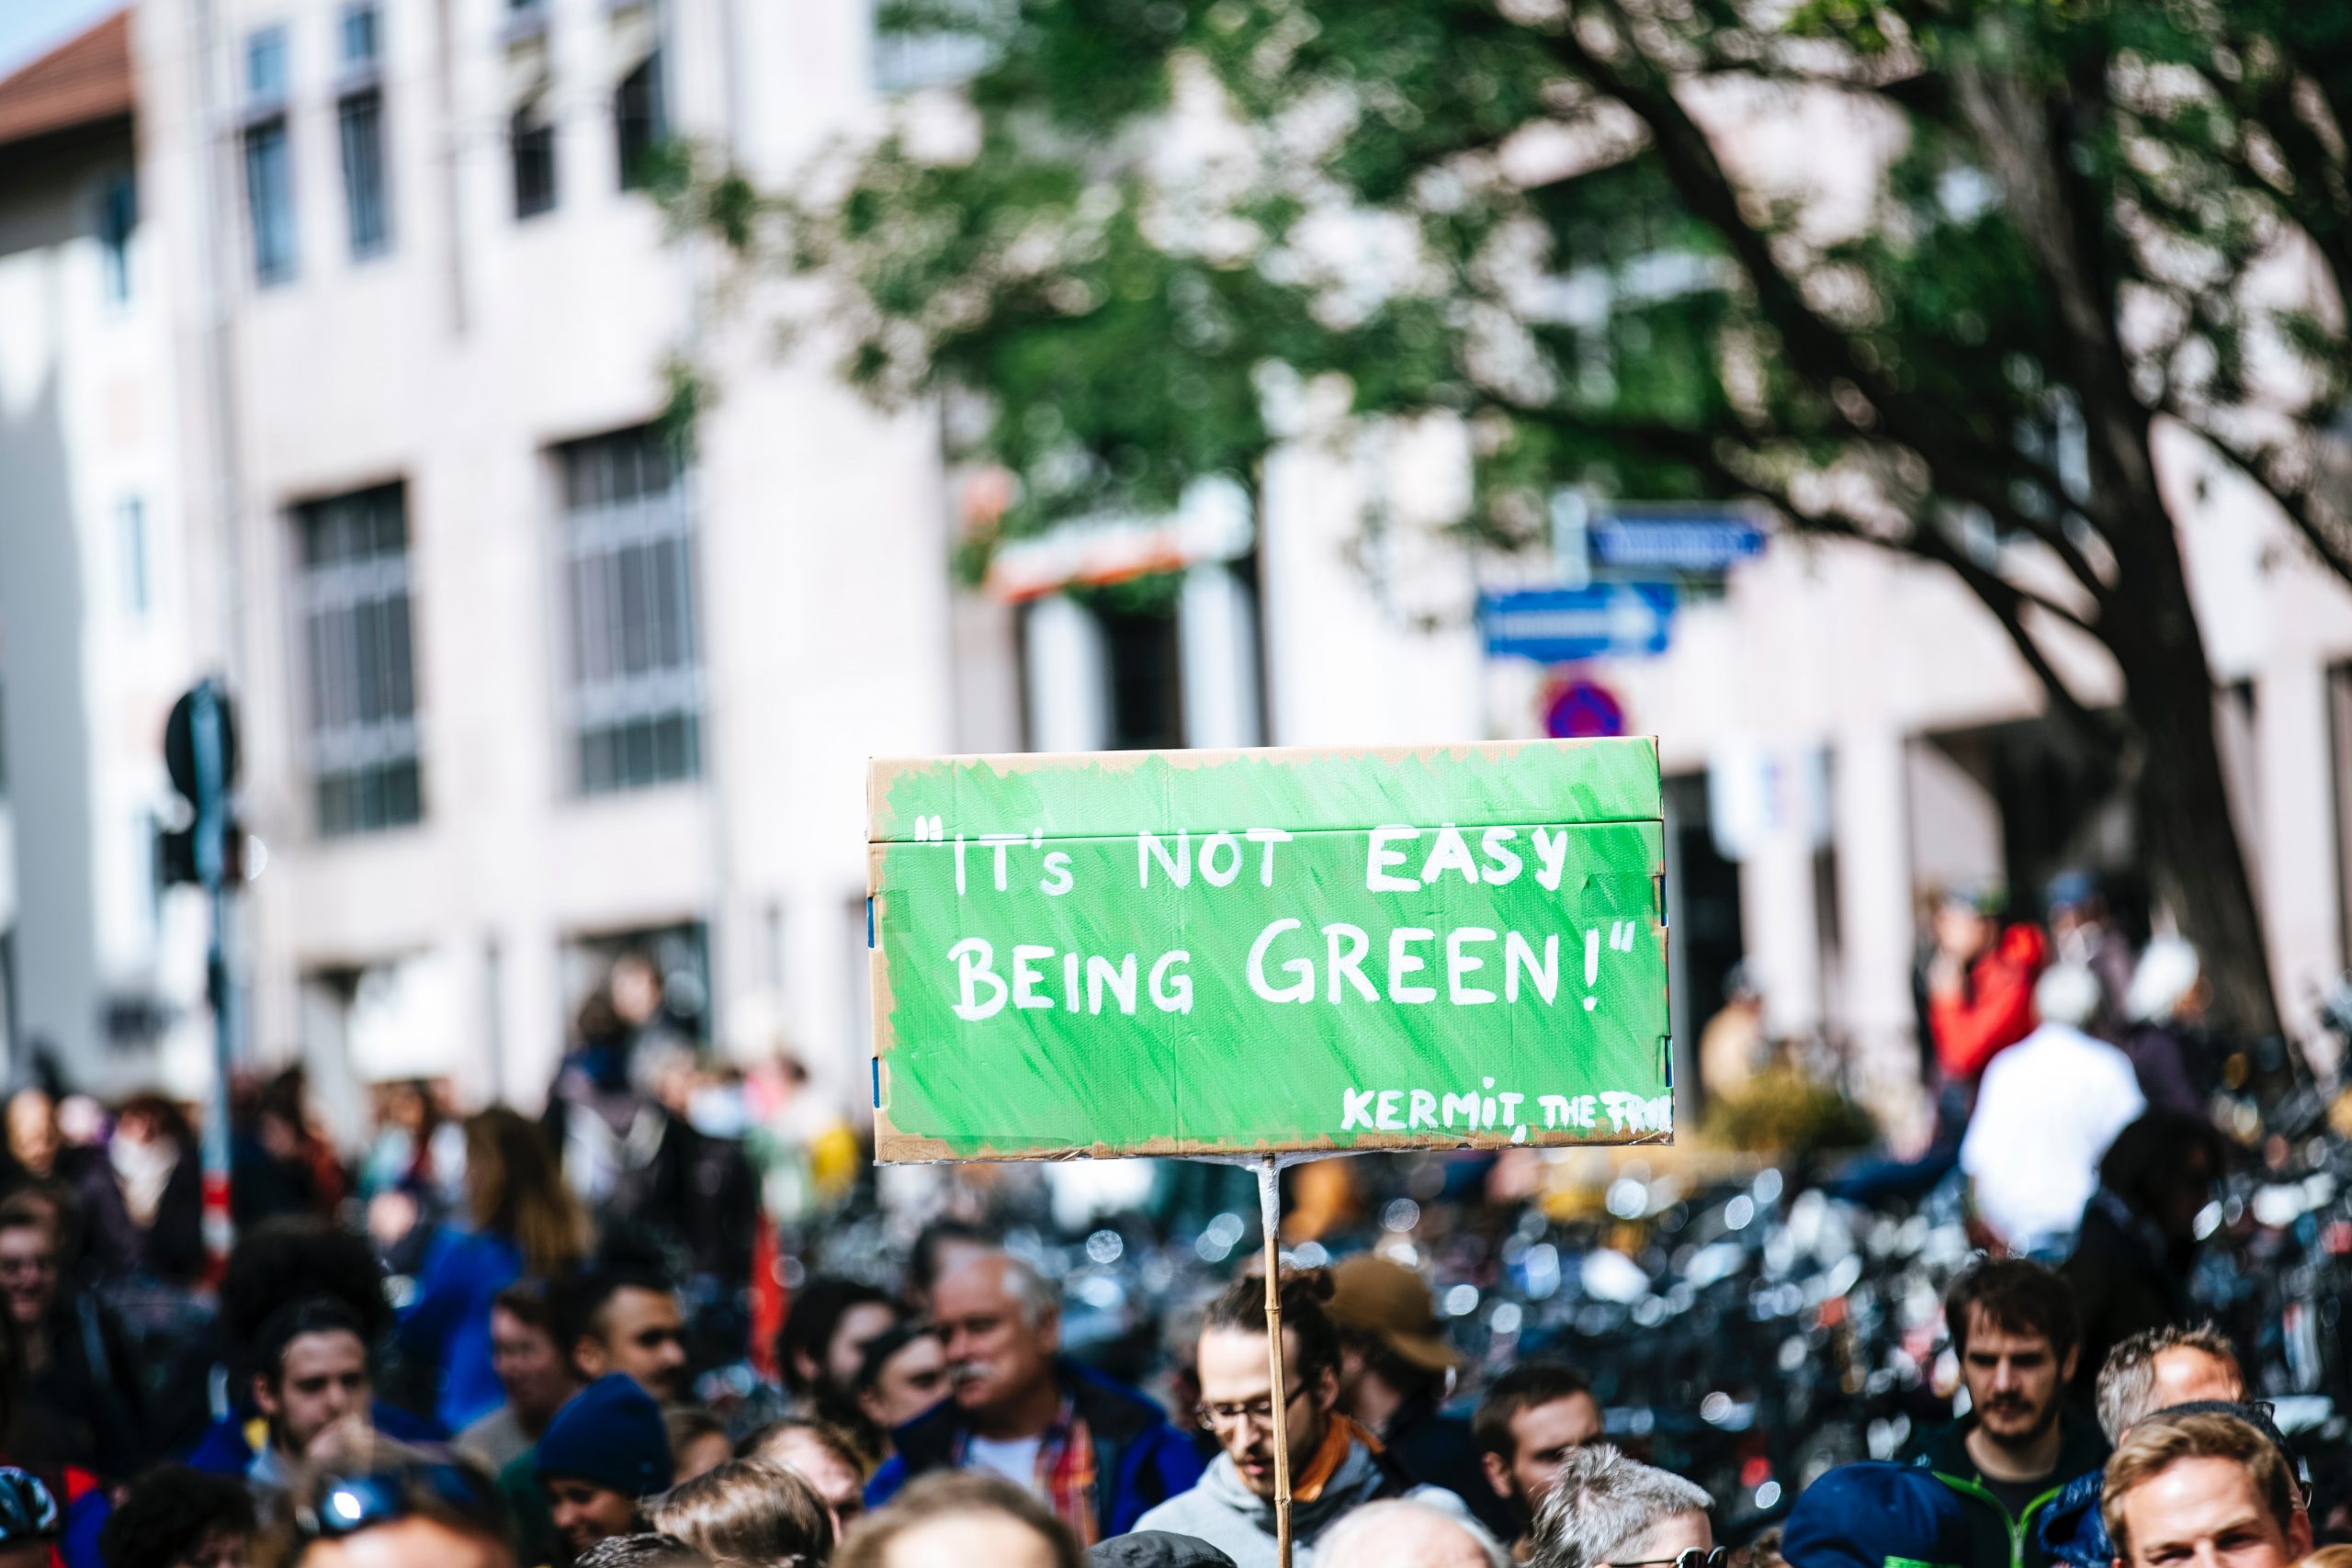 We need a different approach to hit net zero by 2050. (Image: Unsplash)